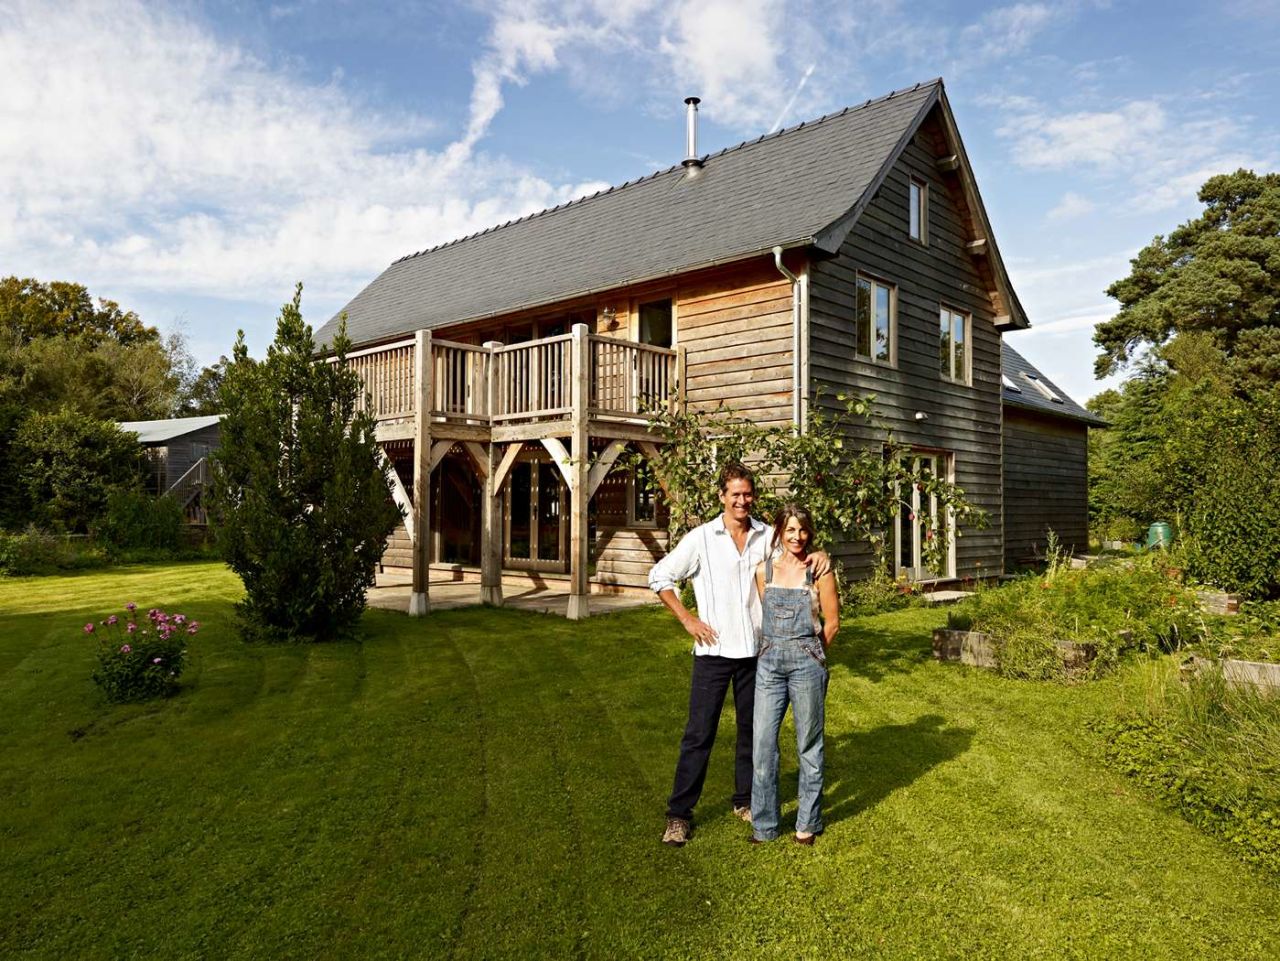 Some builders, such as Rob and Alithea Dawson, have thrown a little more money into their self-build projects. The Dawsons built their own energy-efficient oak home in the woods in Somerset, UK for around $150,000. 